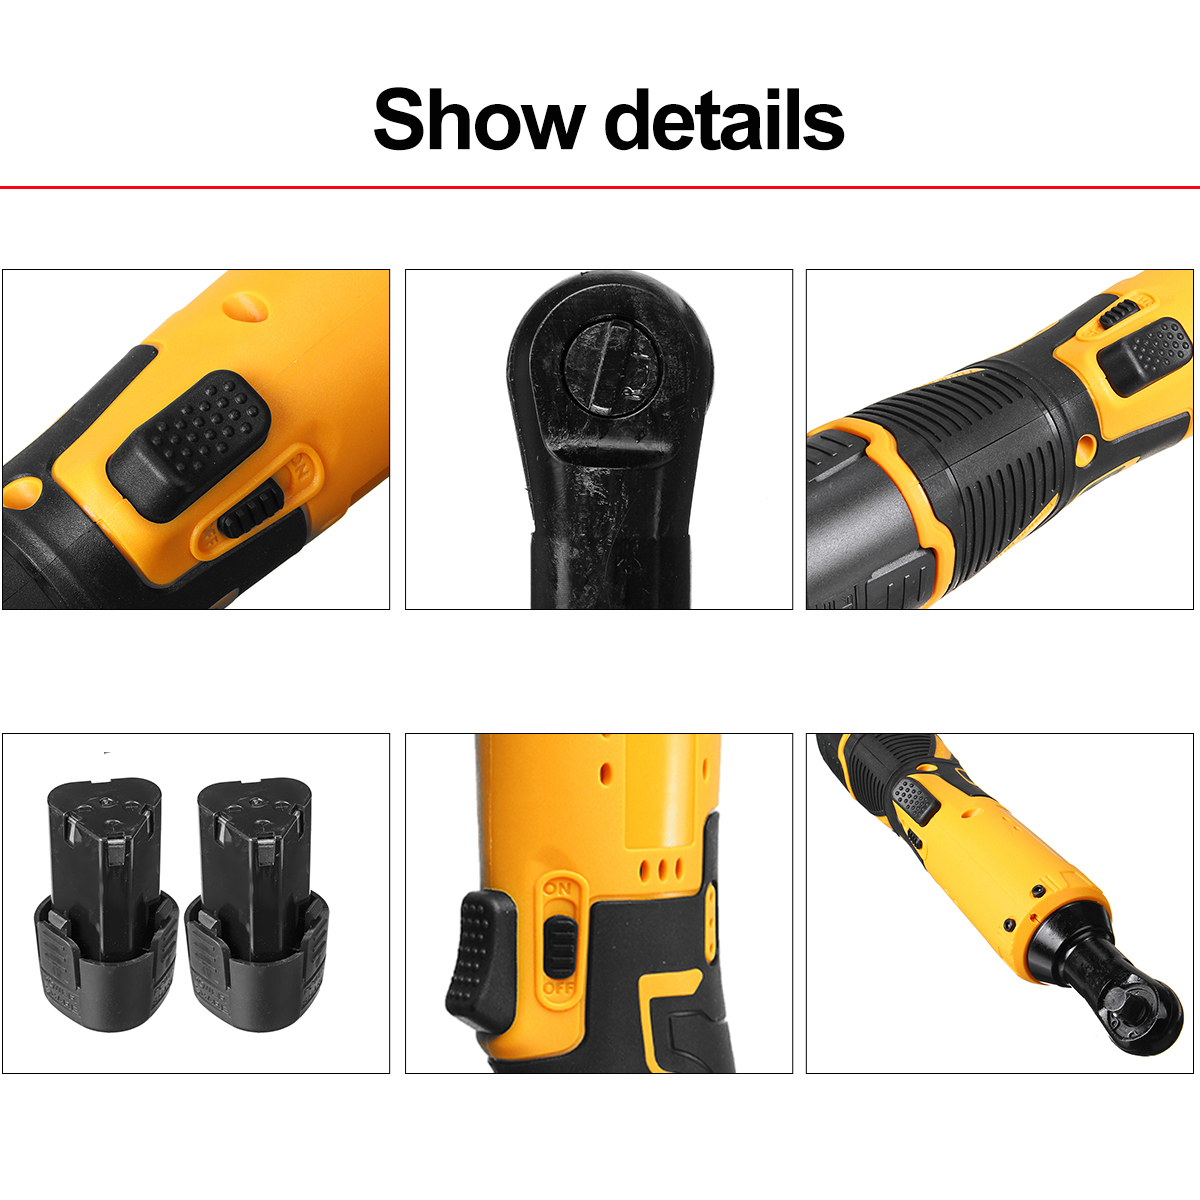 7200mah-Power-Cordless-Ratchet-Wrench-38quot-12V-Li-ion-Electric-Wrench-Max-Torque-45-Compact-Size-1560566-4